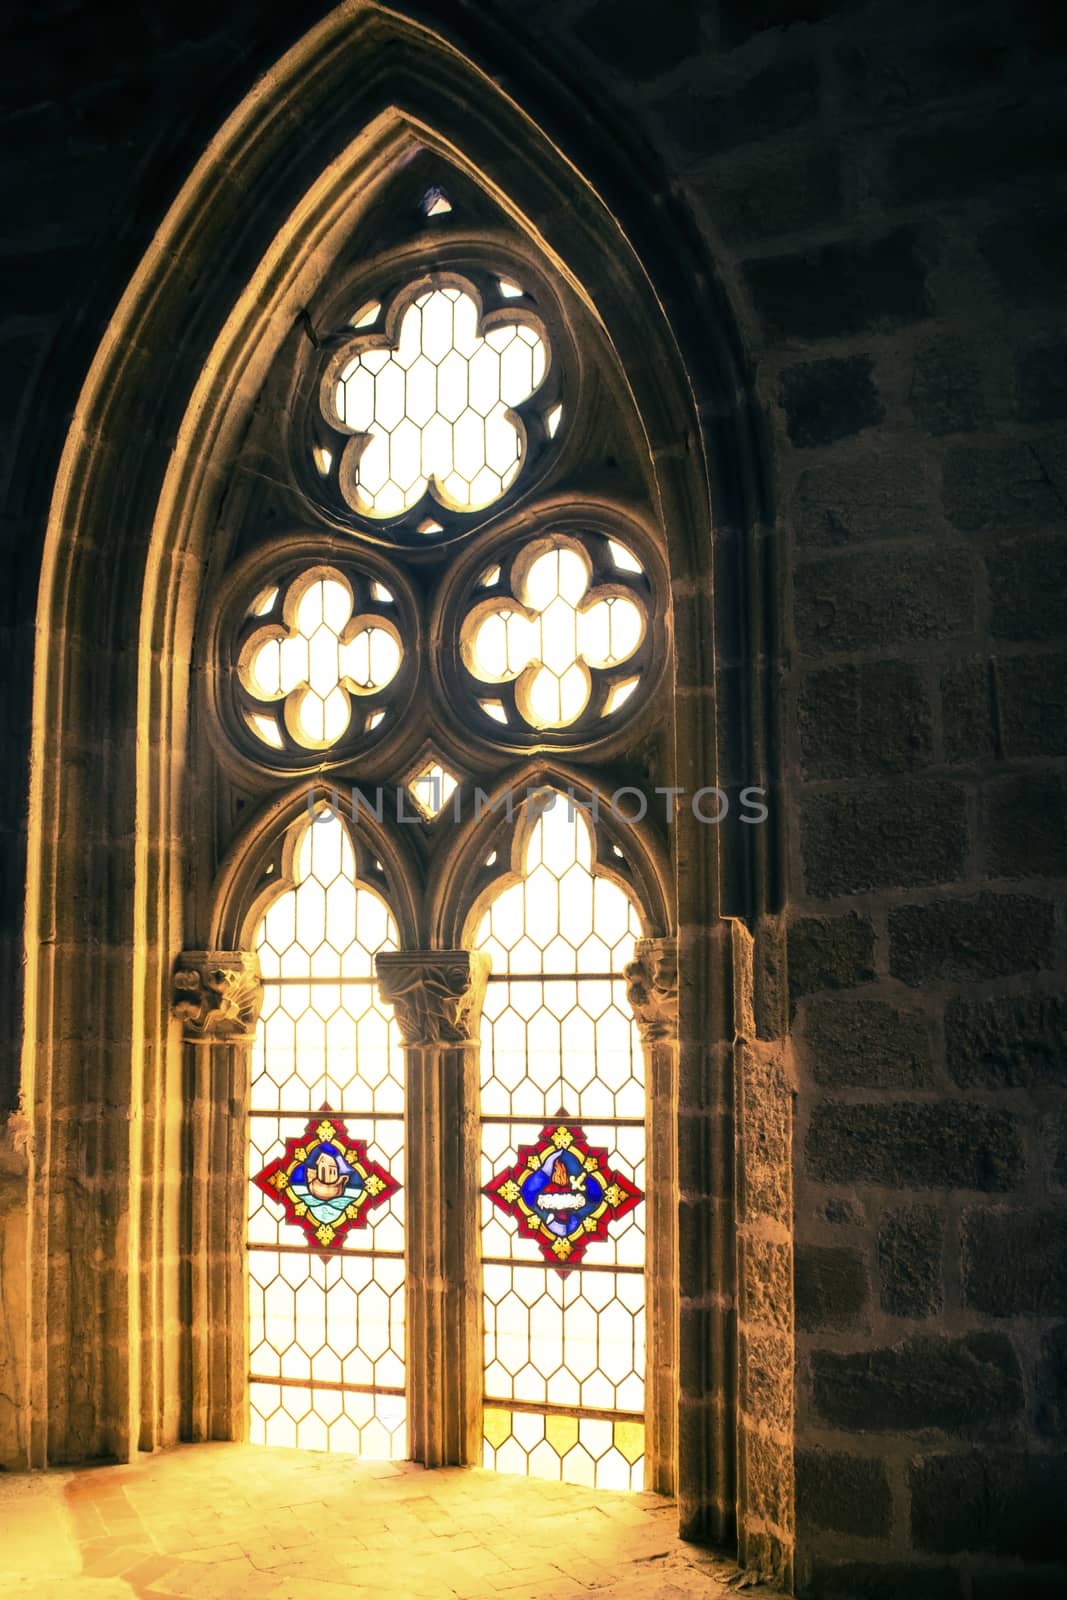 Sunlight shining through stained glass of gothic window of a church.